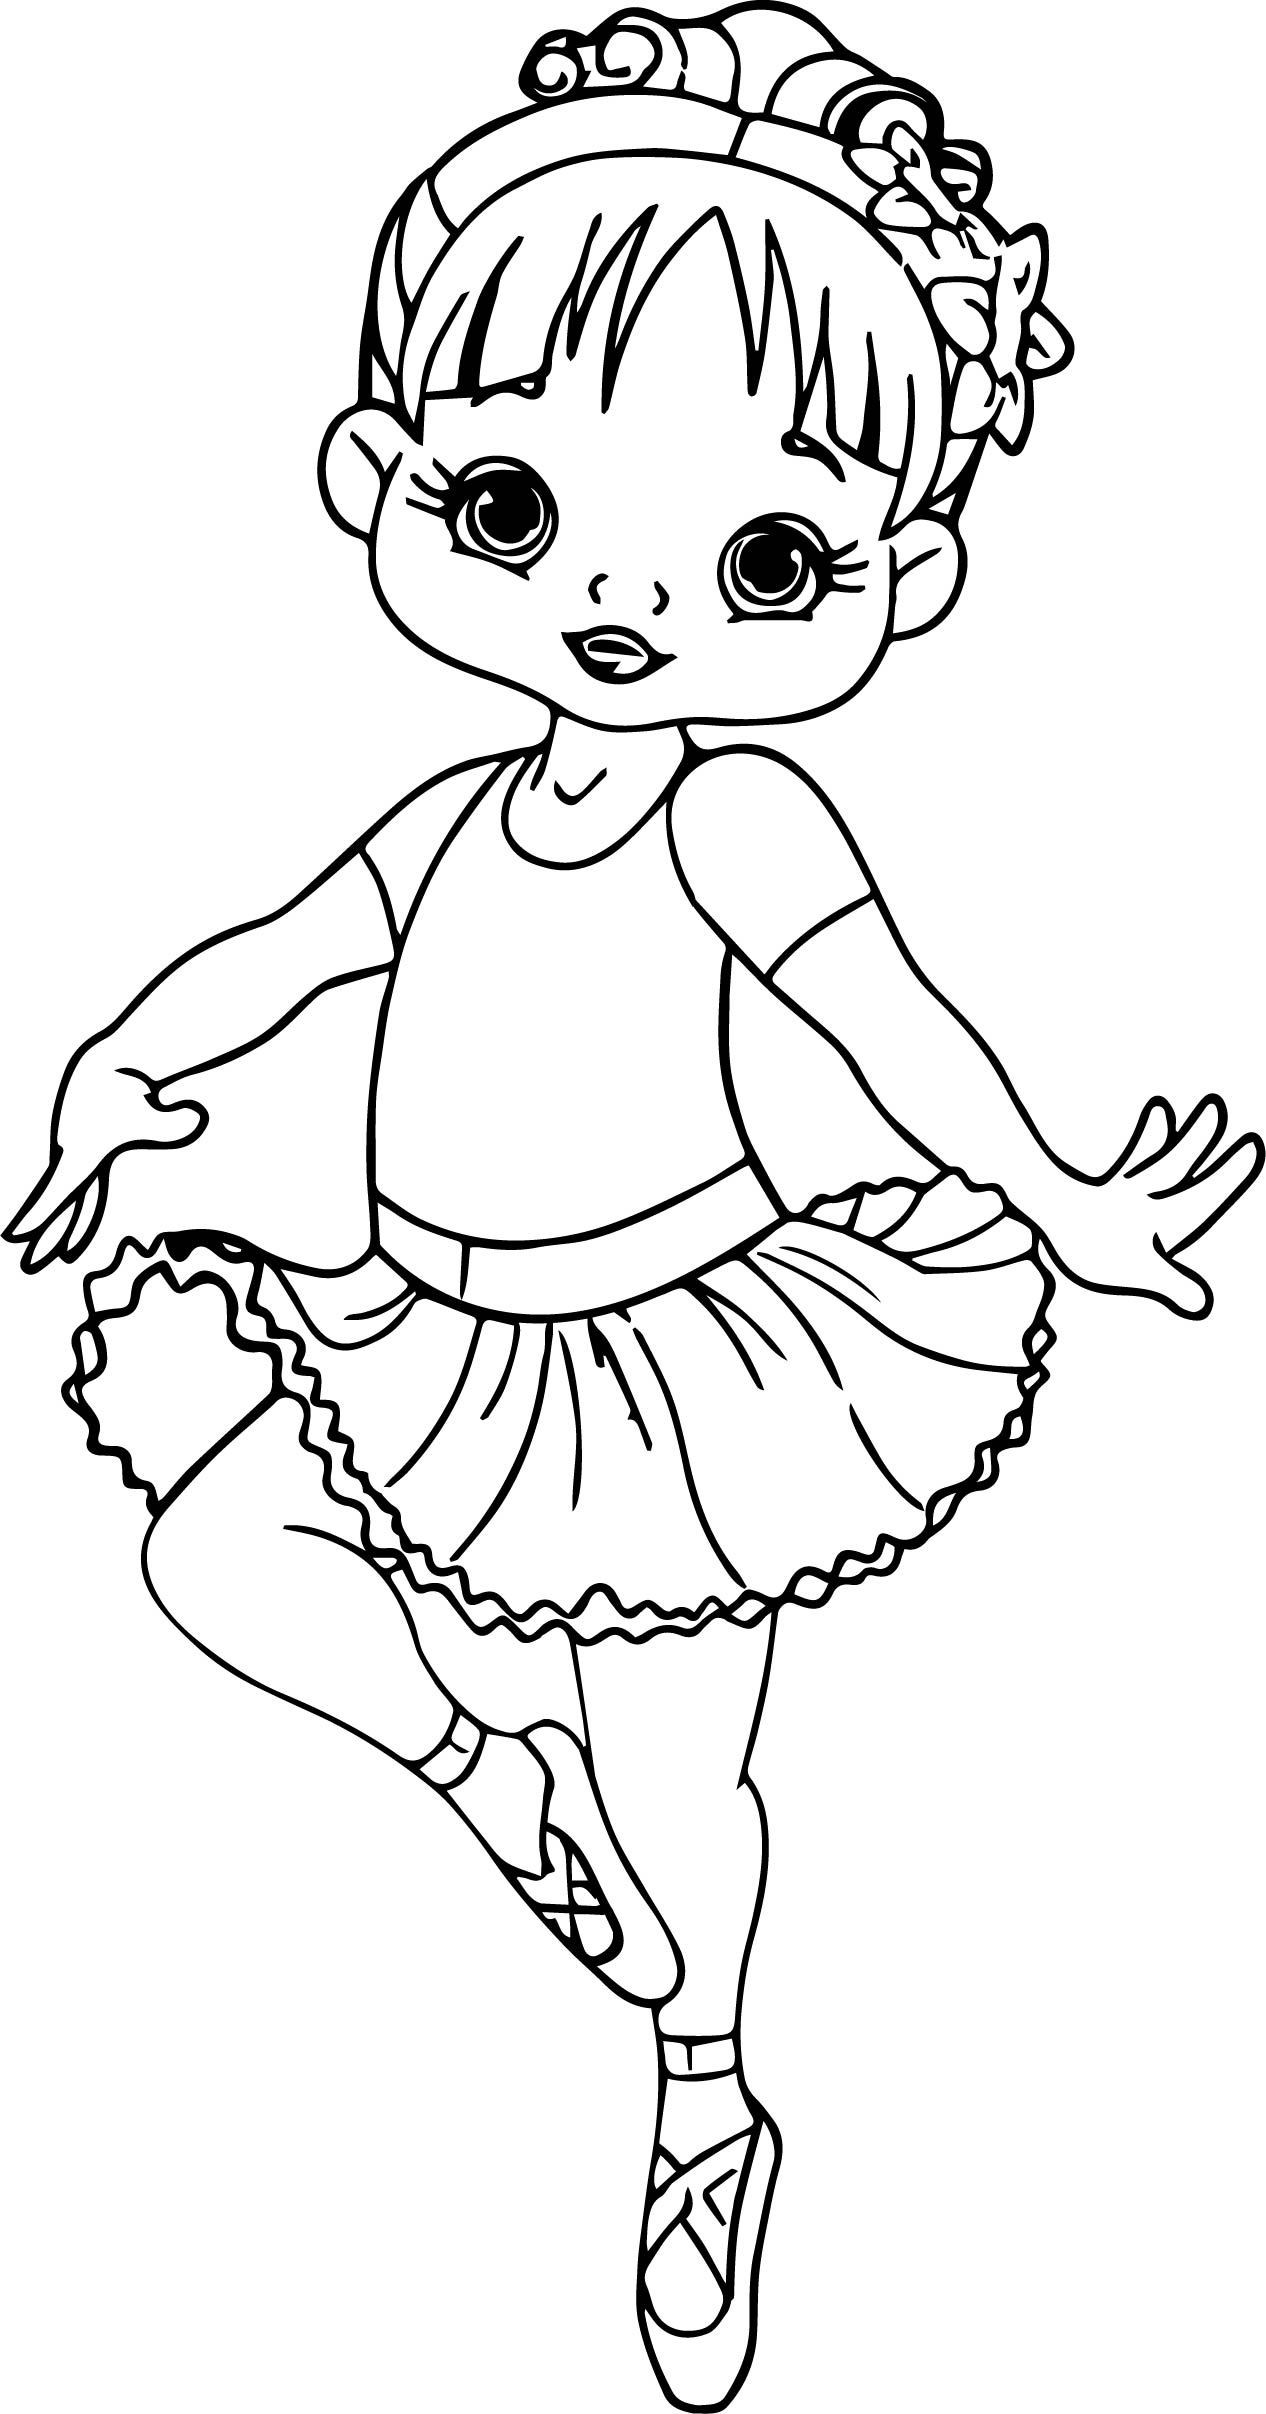 Toddler Girl Coloring Pages
 Ballerina Cartoon Girl Coloring Page